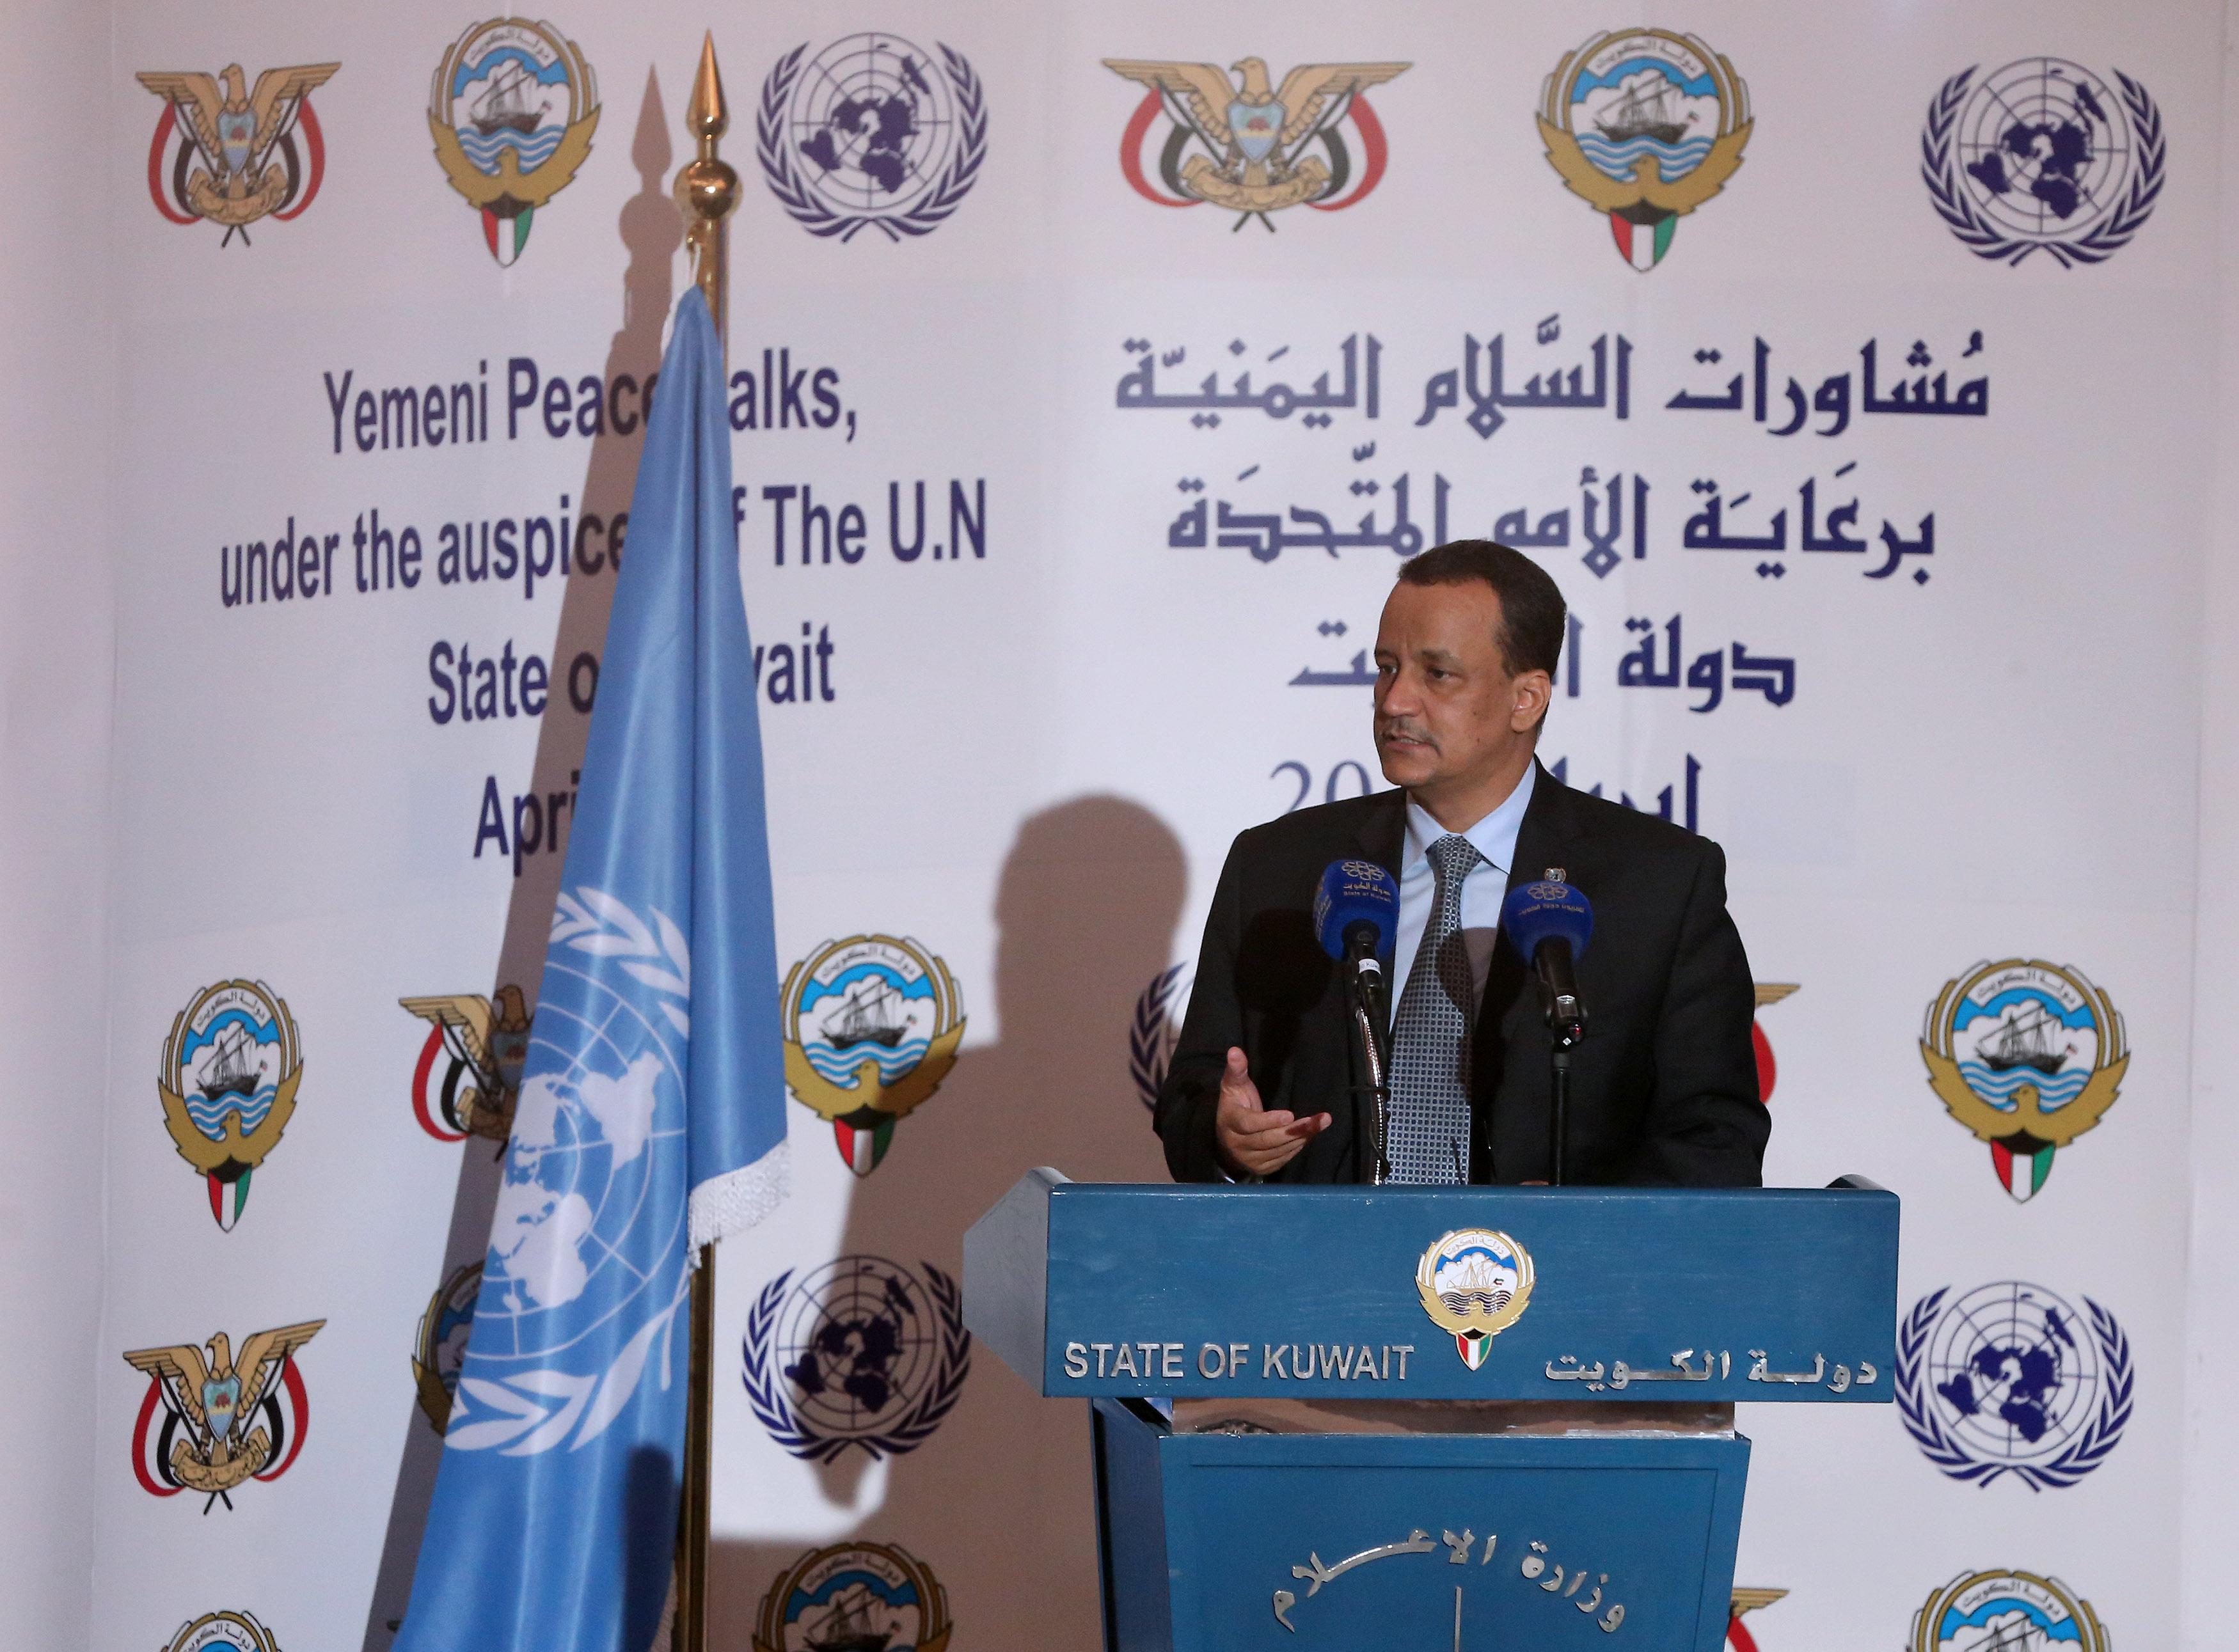 UN Secretary General's Special Envoy for Yemen Ismail Ould Cheikh Ahmed